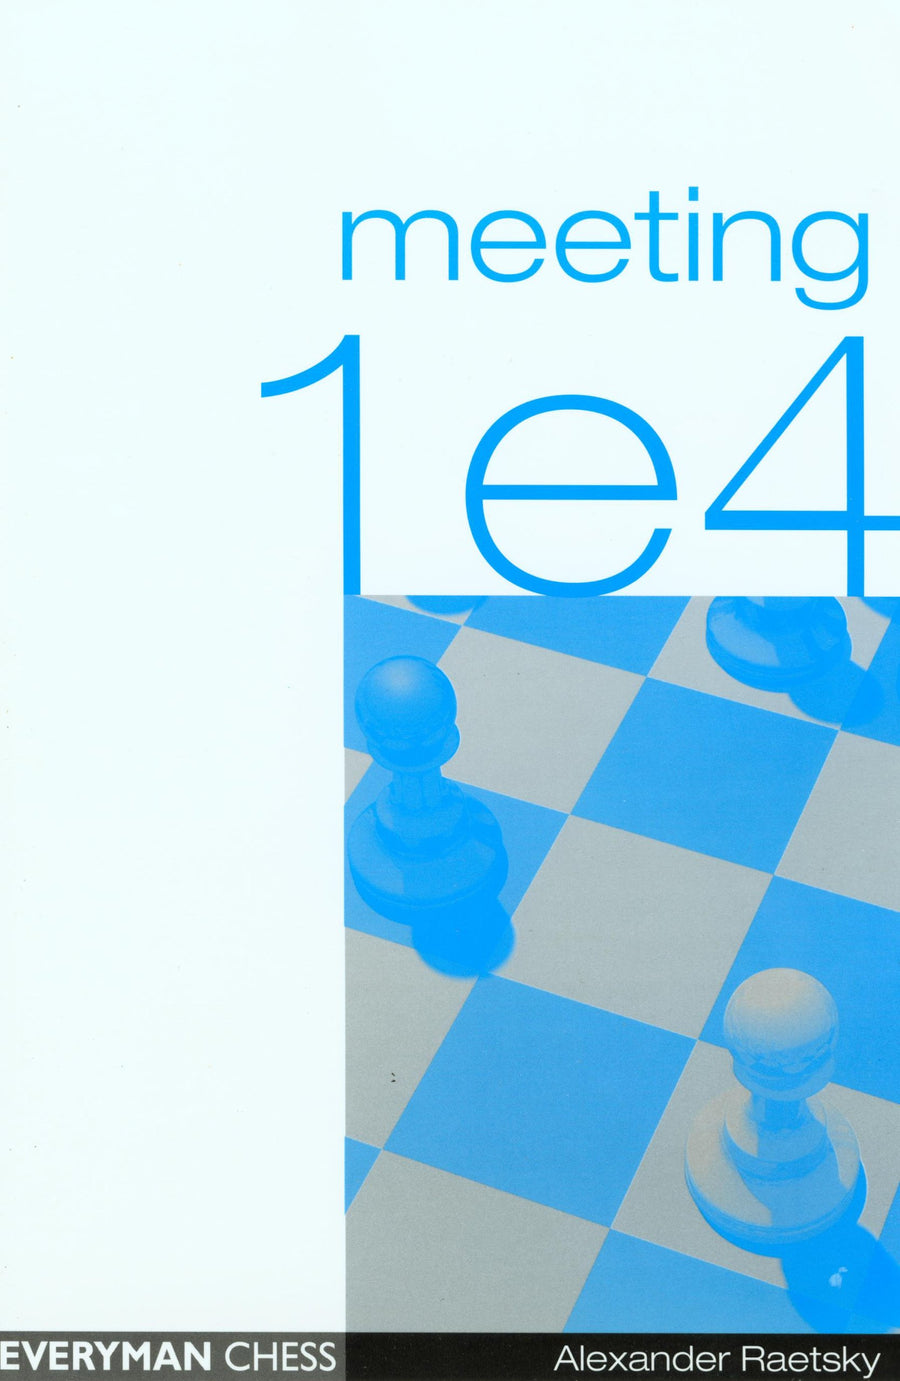 Meeting 1 e4 front cover